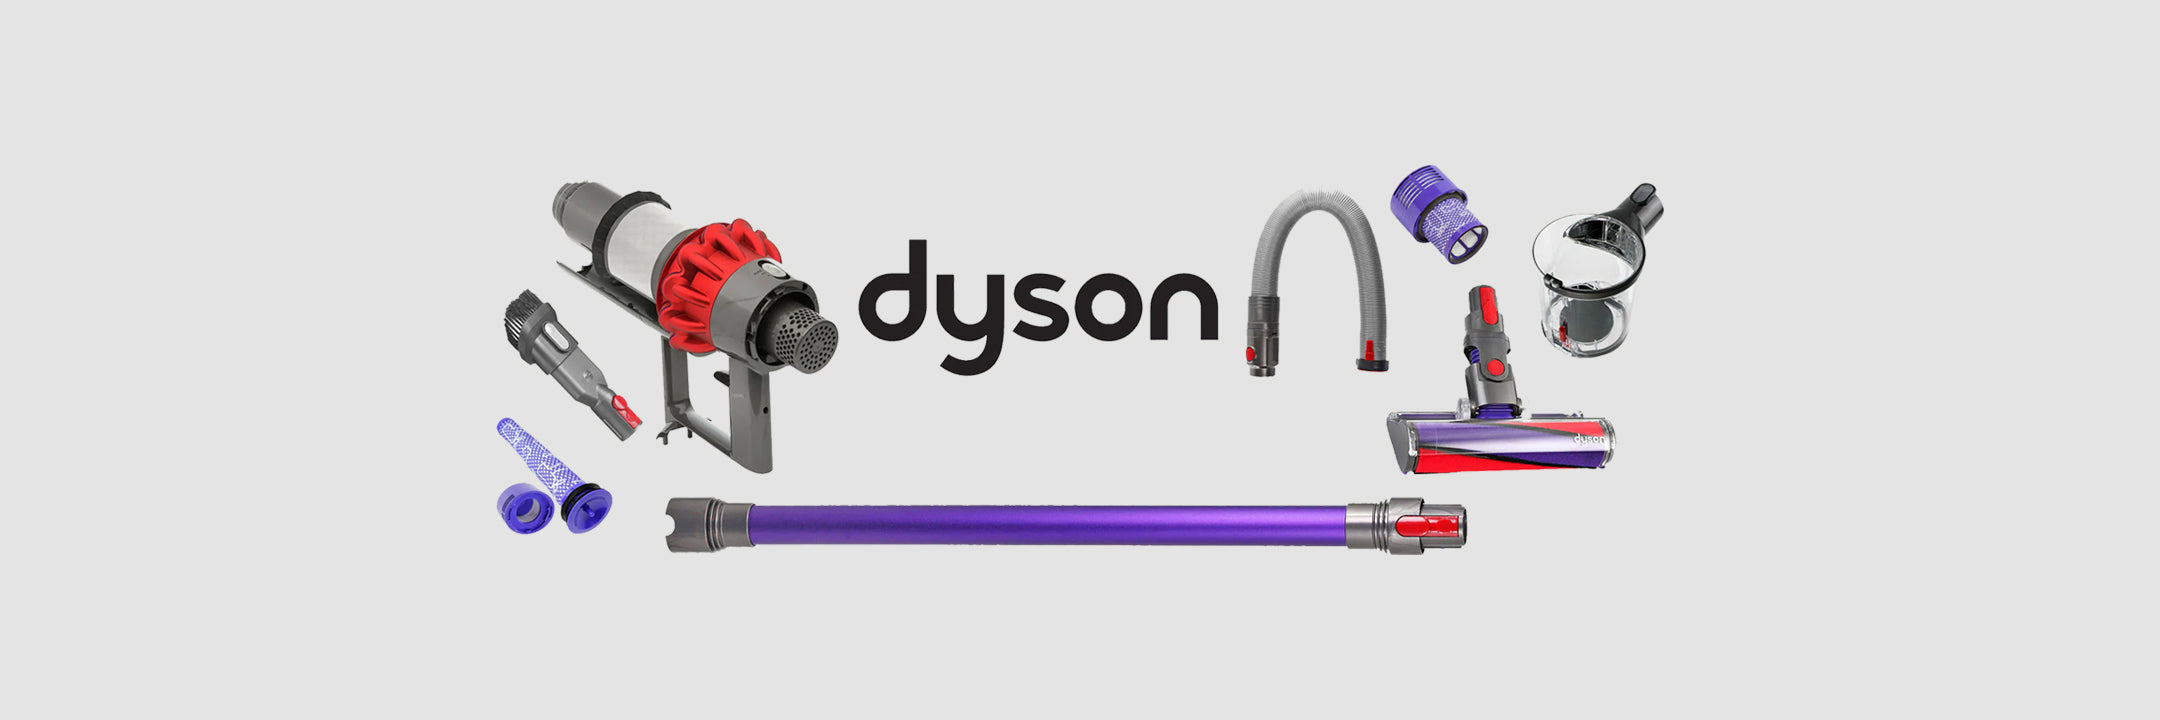 Dyson Spare Parts and Accessories